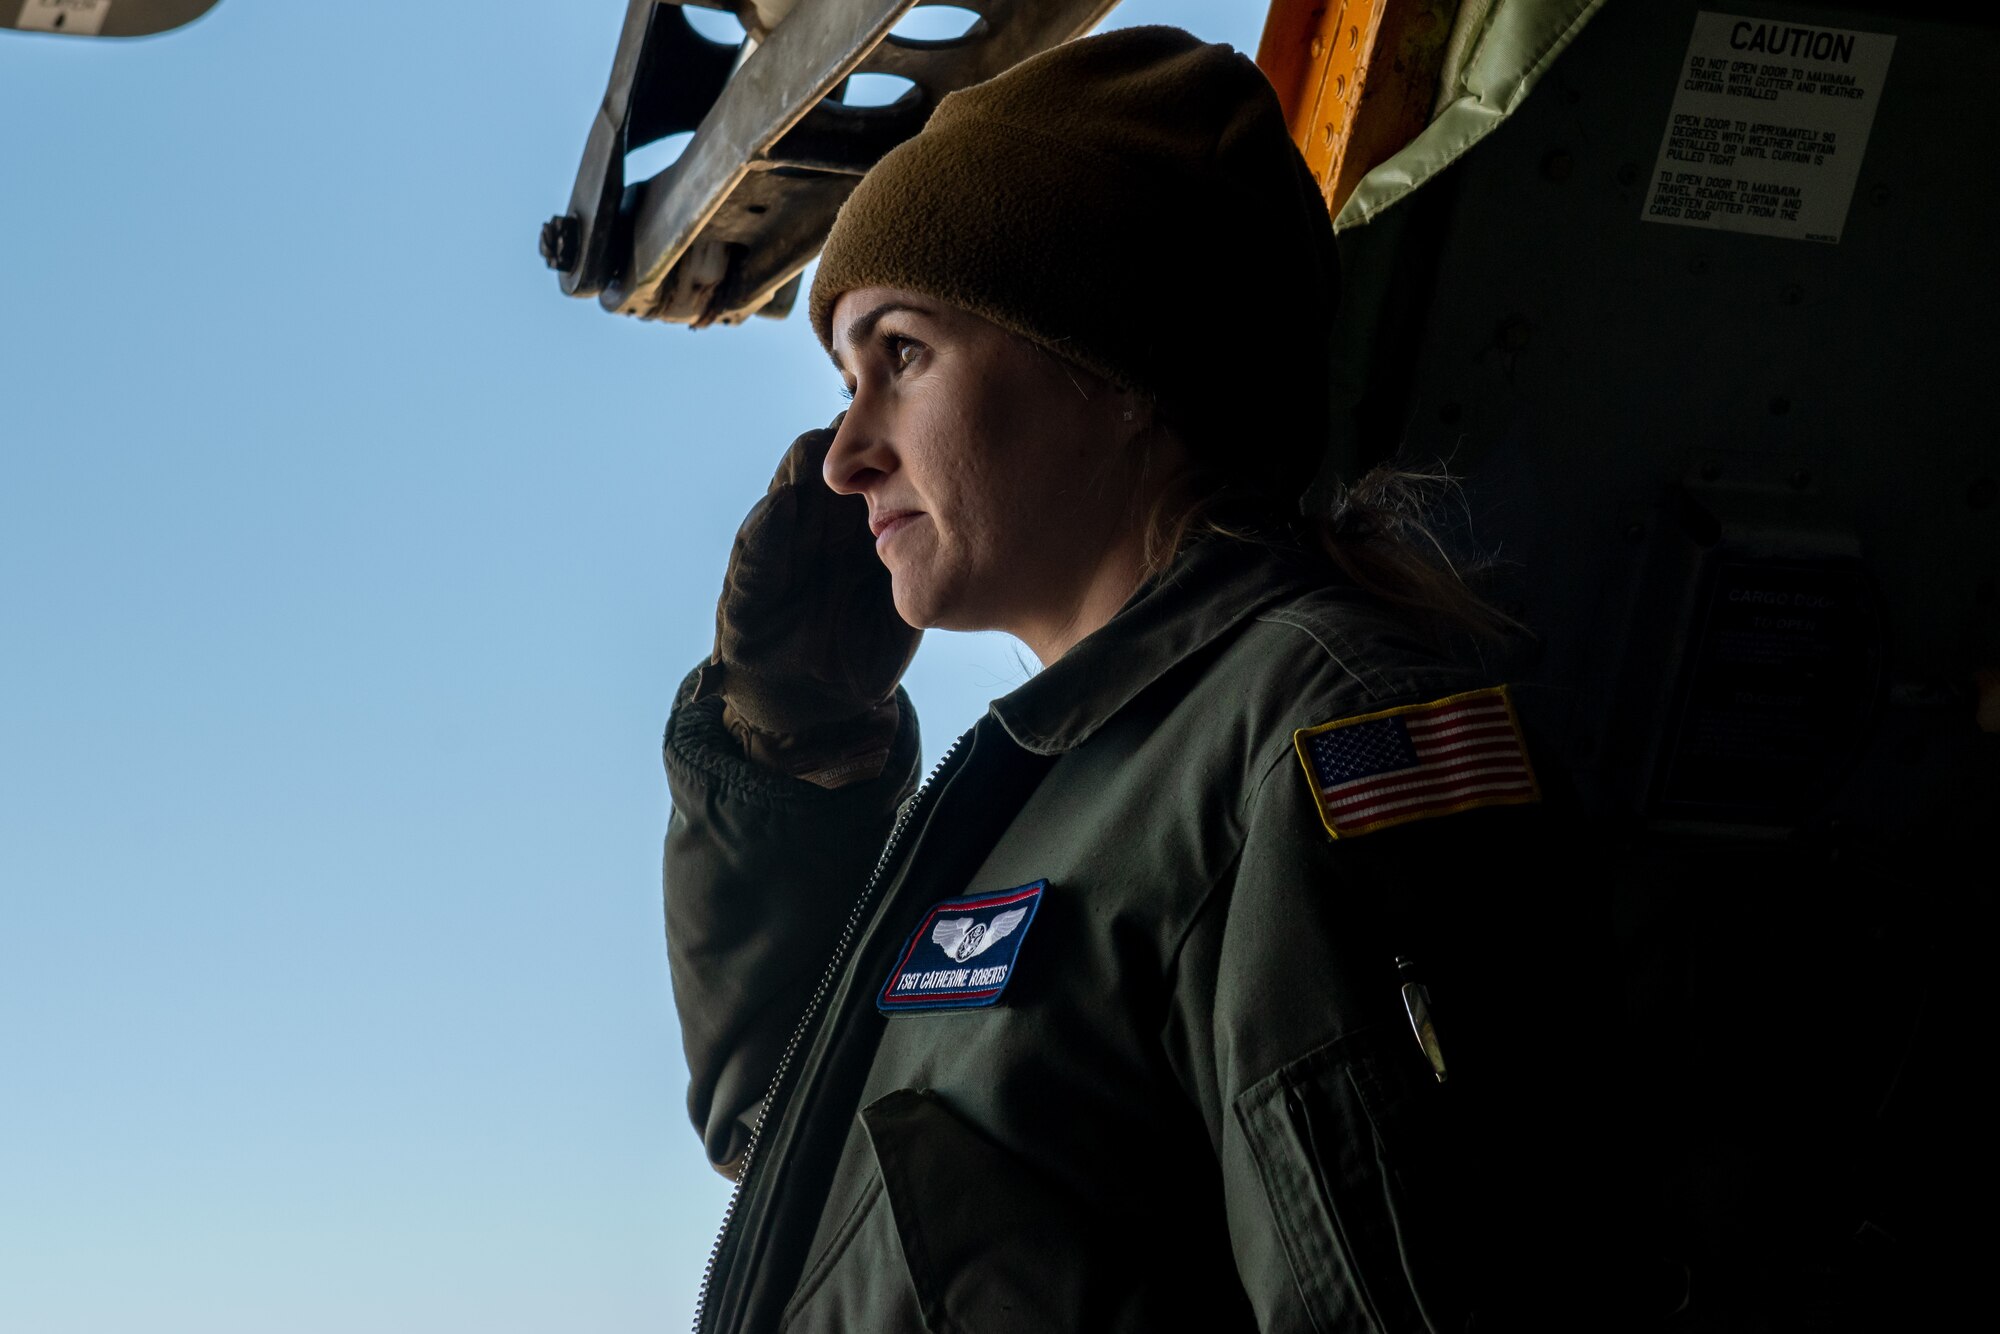 U.S. Air Force Tech. Sgt. Catherine Roberts, boom operator with the 336th Air Refueling Squadron from March Air Reserve Base, California, salutes an empty casket during a cargo loading exercise Feb. 5, 2022 at Hill Air Force Base, Utah